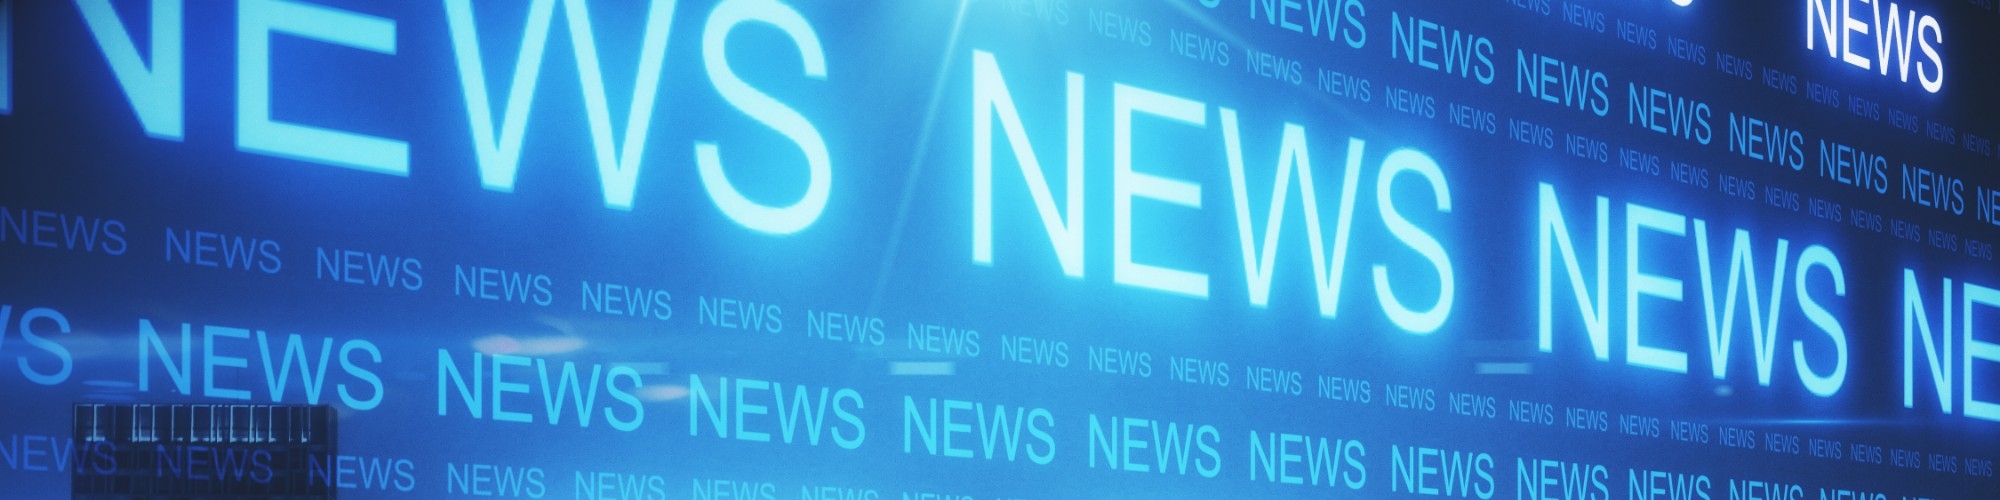 the word news is repeated on a blue background; header: newsletters